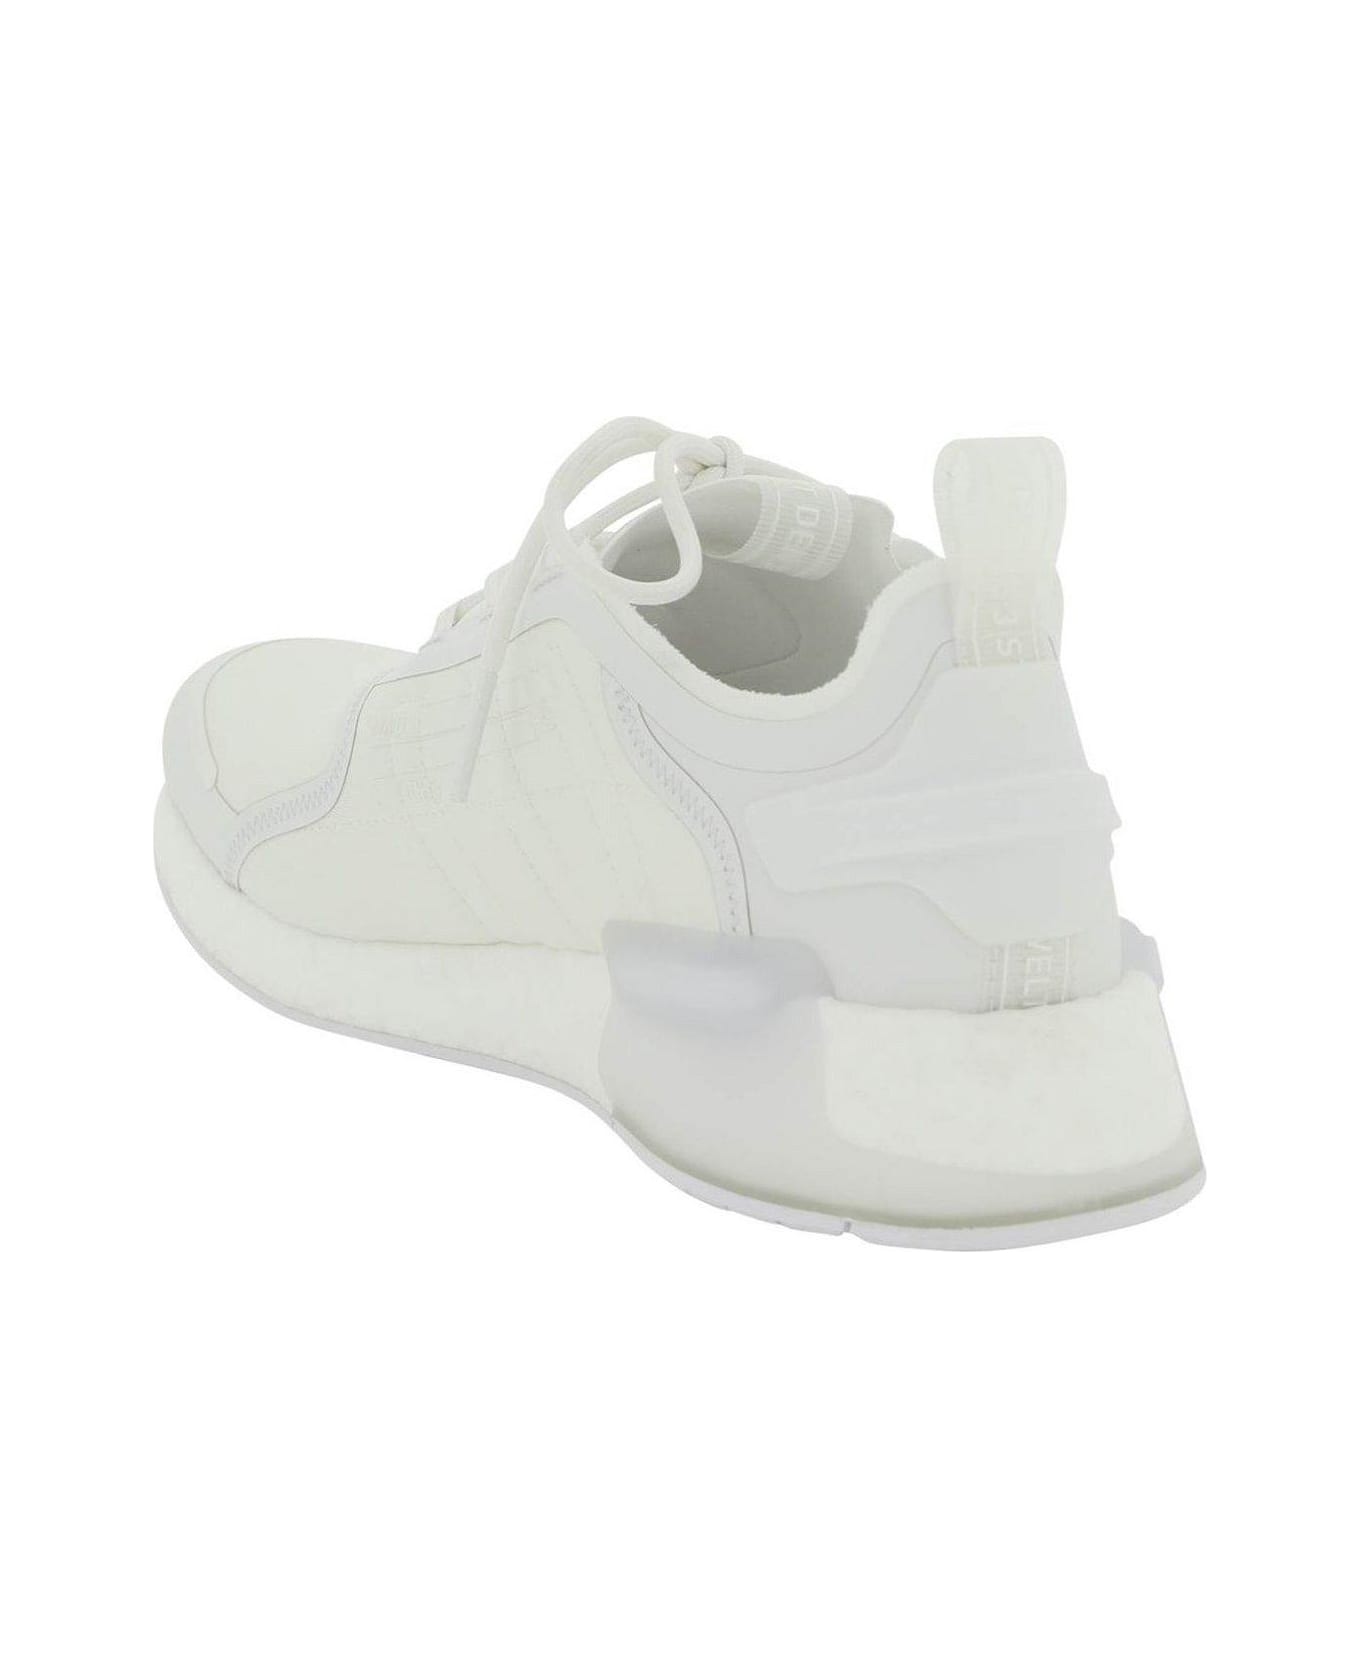 Adidas Nmd V-3 Lace-up Sneakers - Ftwwht/ftwwht/ftwwht